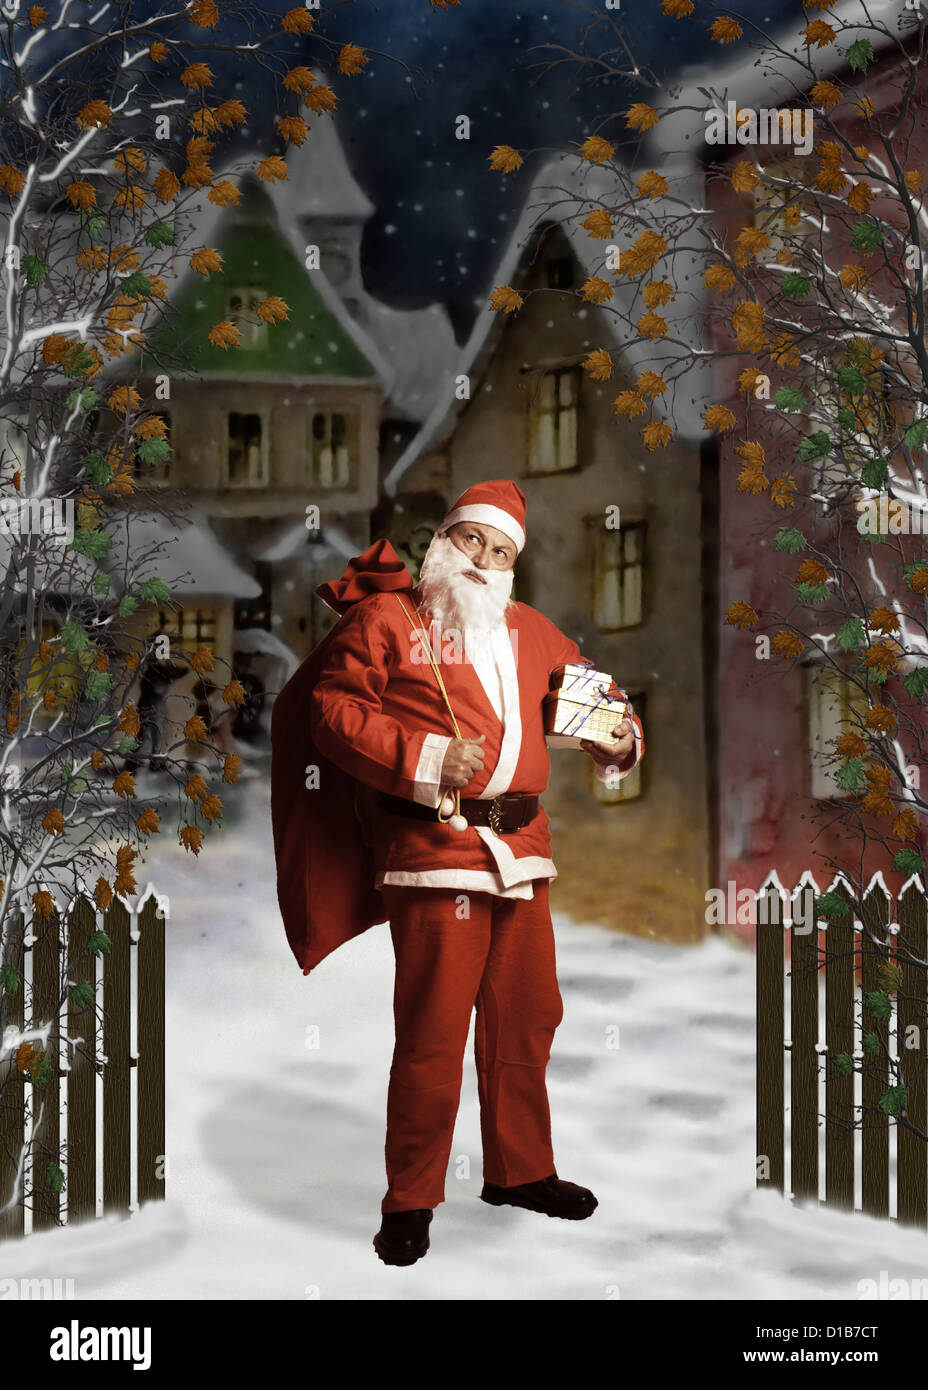 Santa Claus in a snowy setting Stock Photo